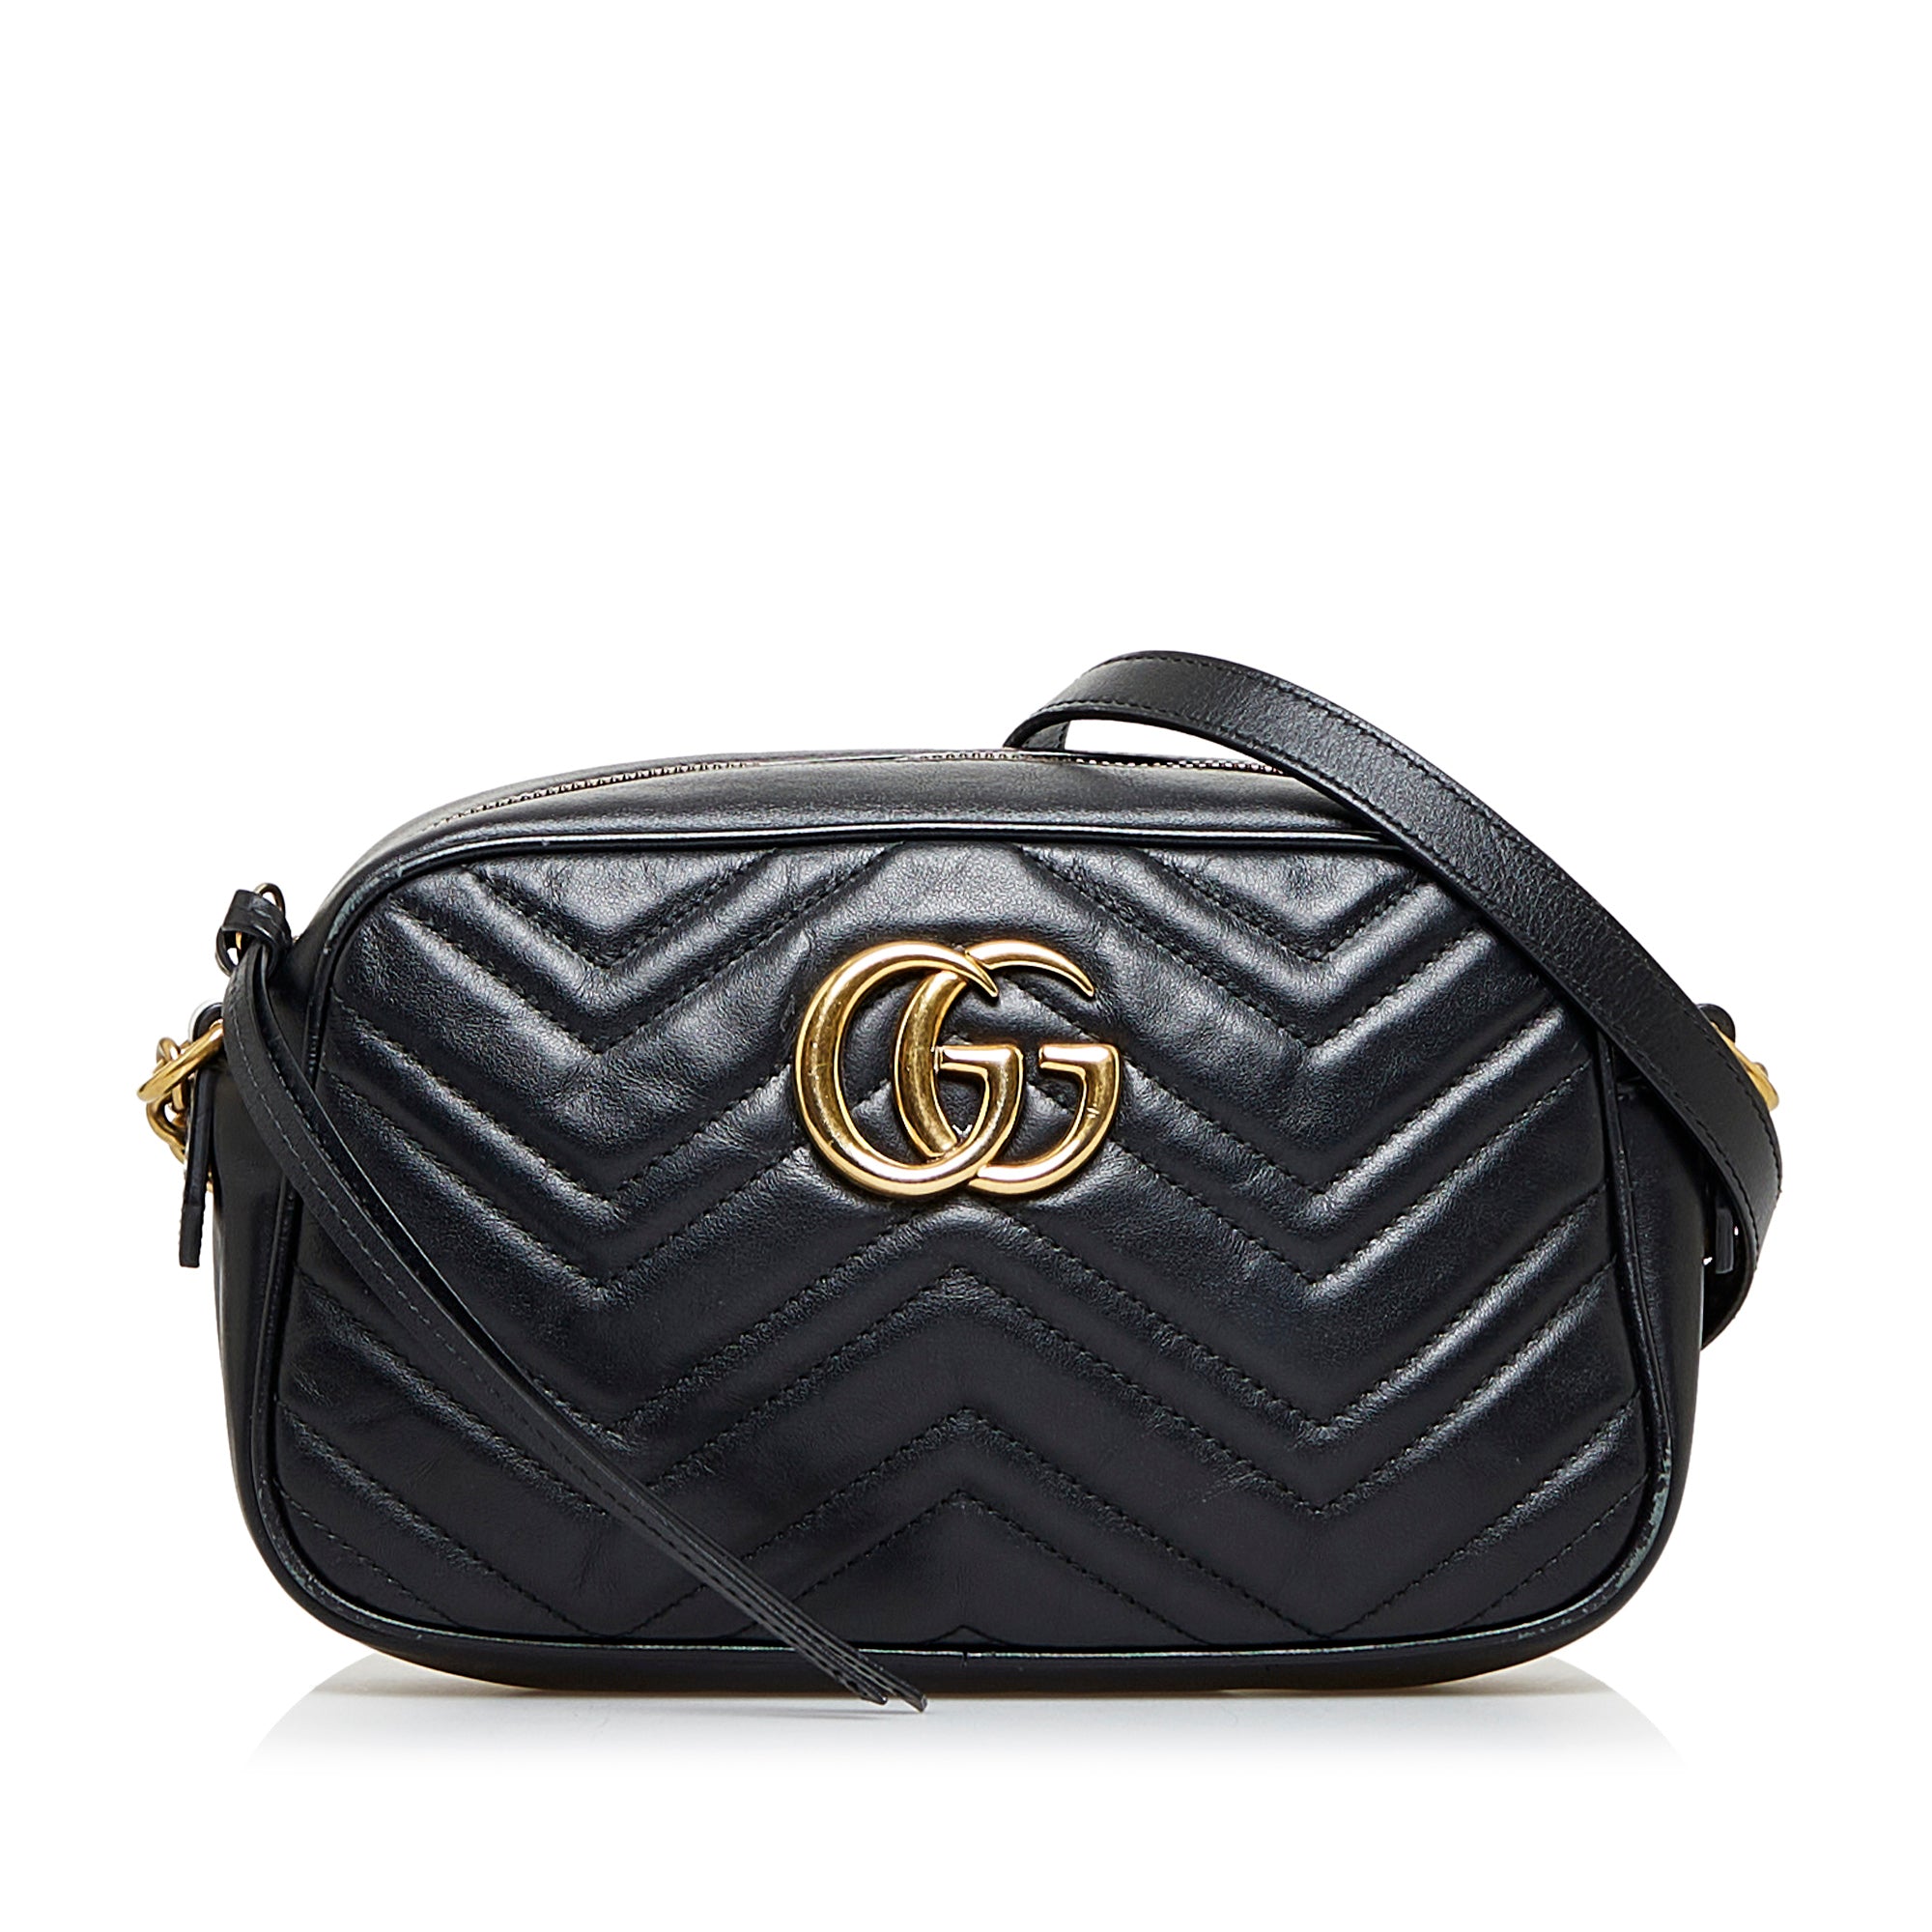 GG Marmont small quilted-leather cross-body bag